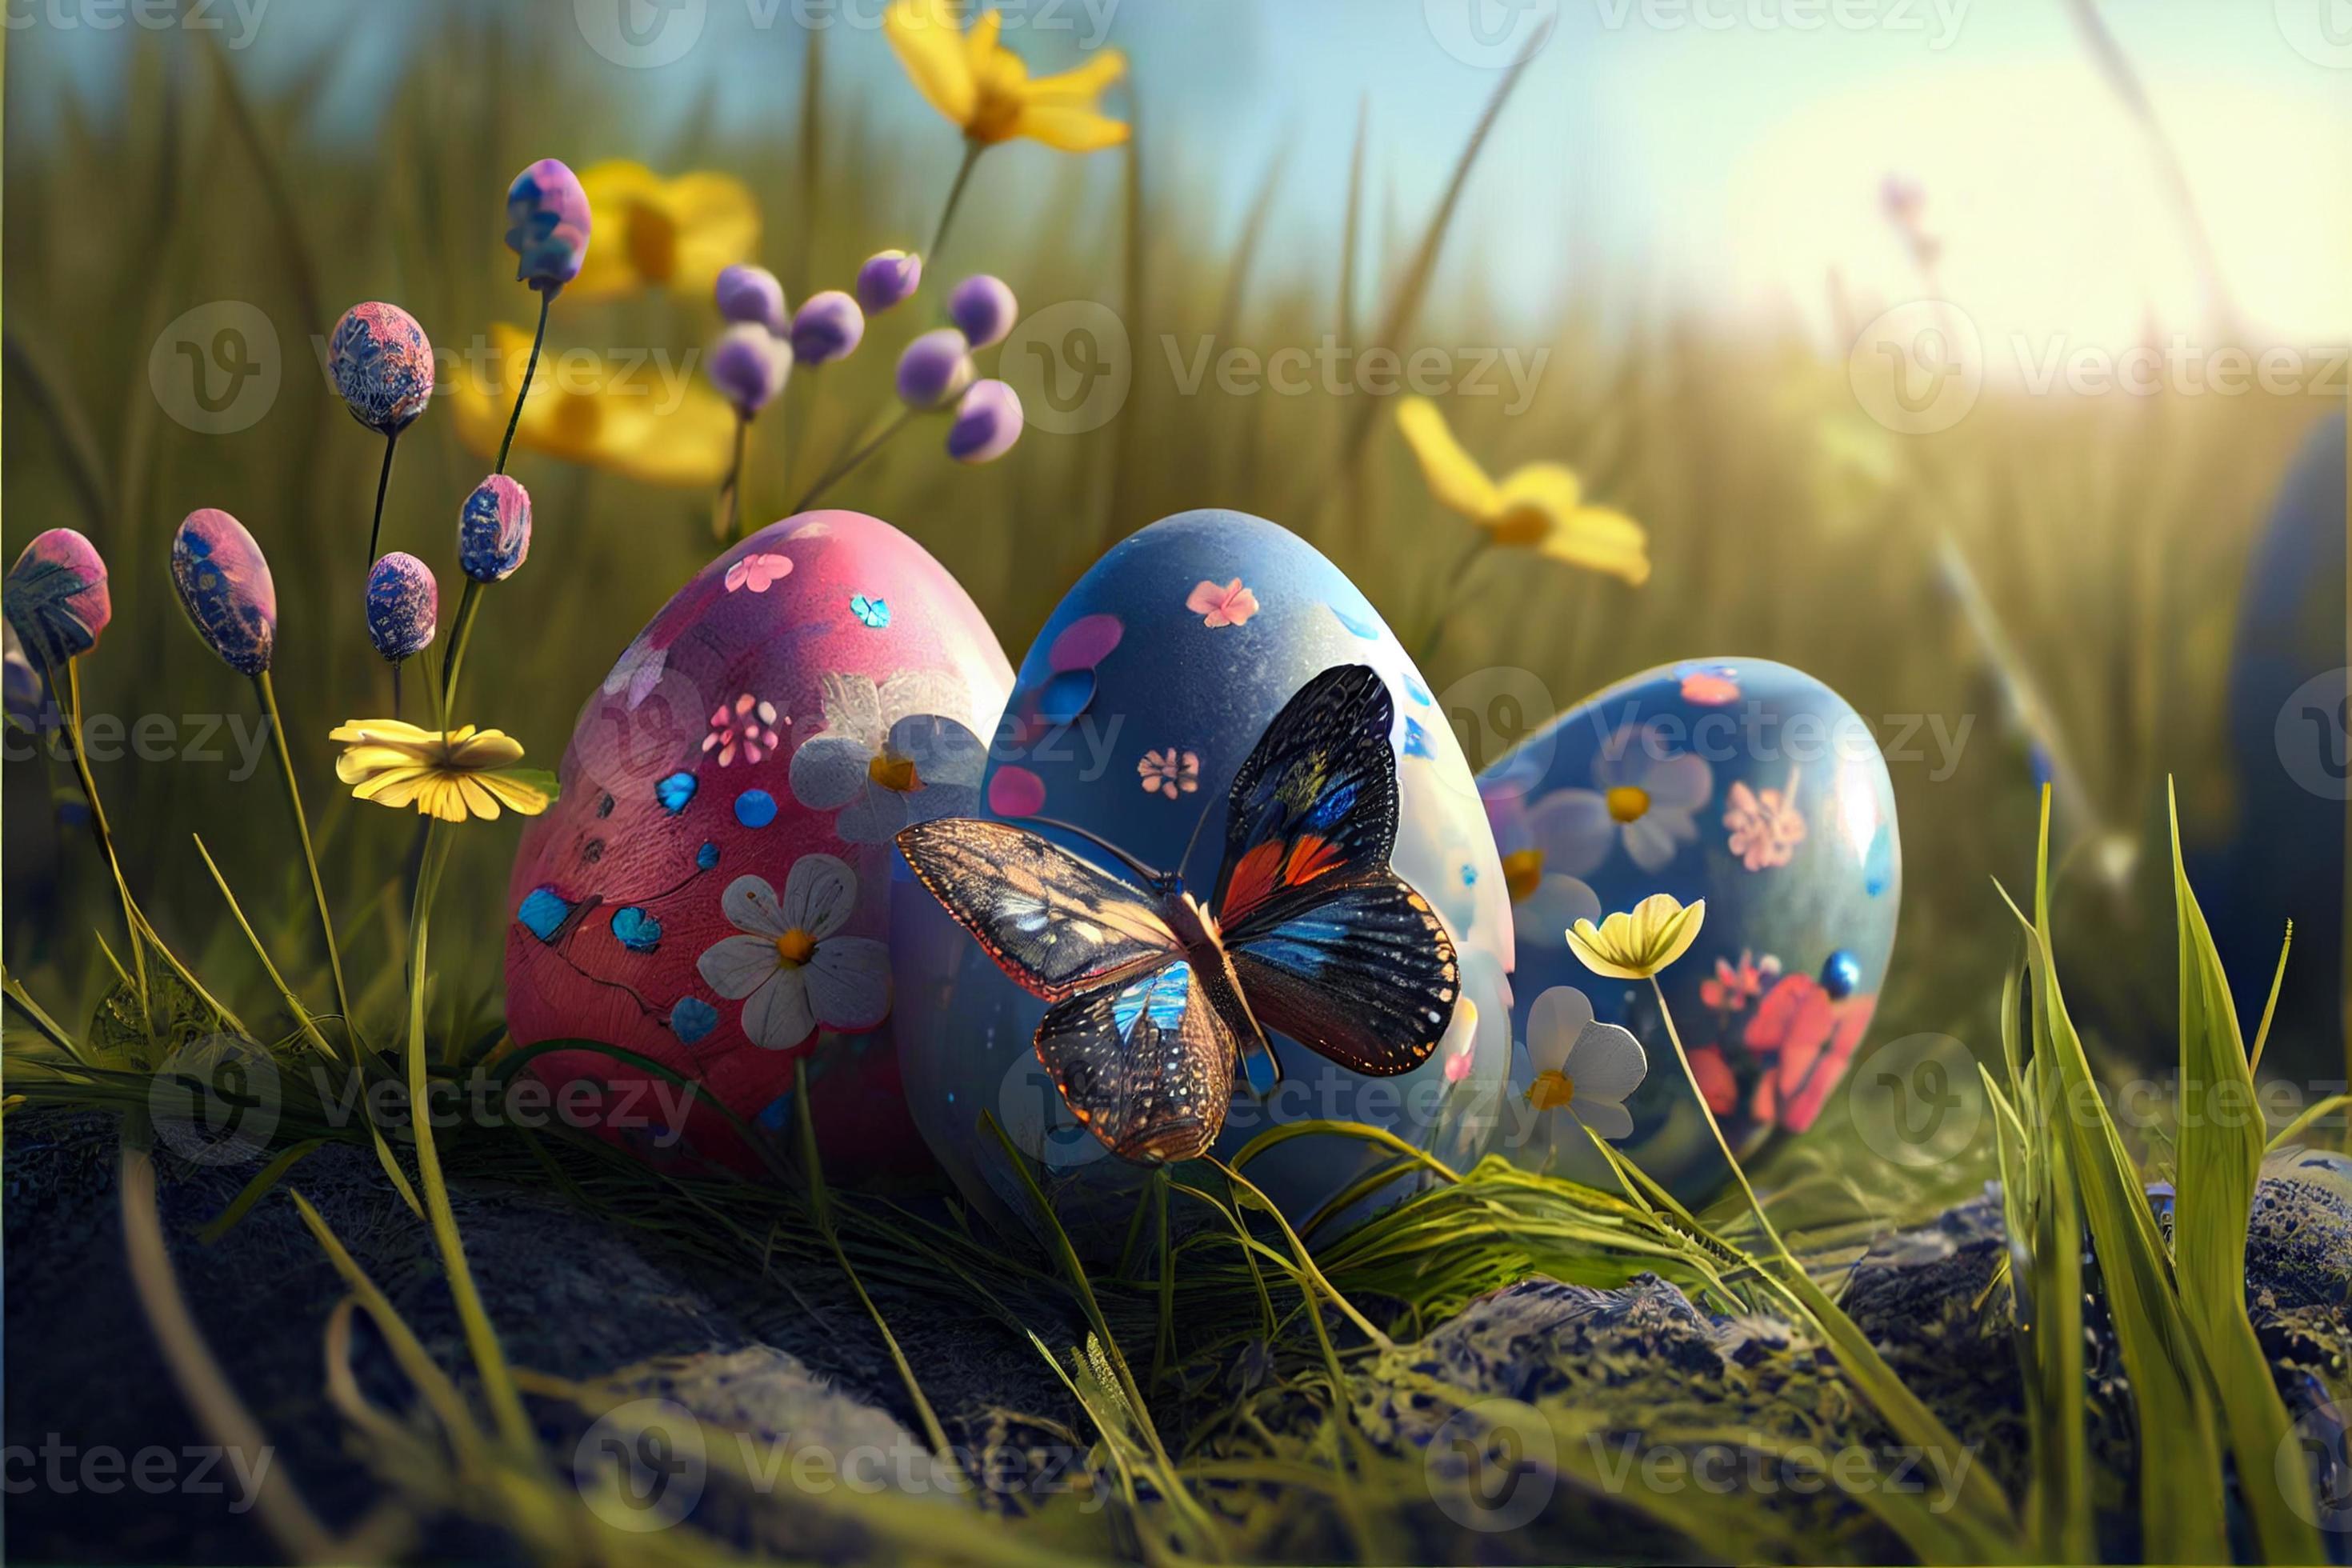 Easter, April 9, Christian Day To commemorate the resurrection of Jesus, a symbol of hope, rebirth and forgiveness, the Easter Egg Hunt decorates eggs with patterns and bright colors. 16703924 Stock Photo